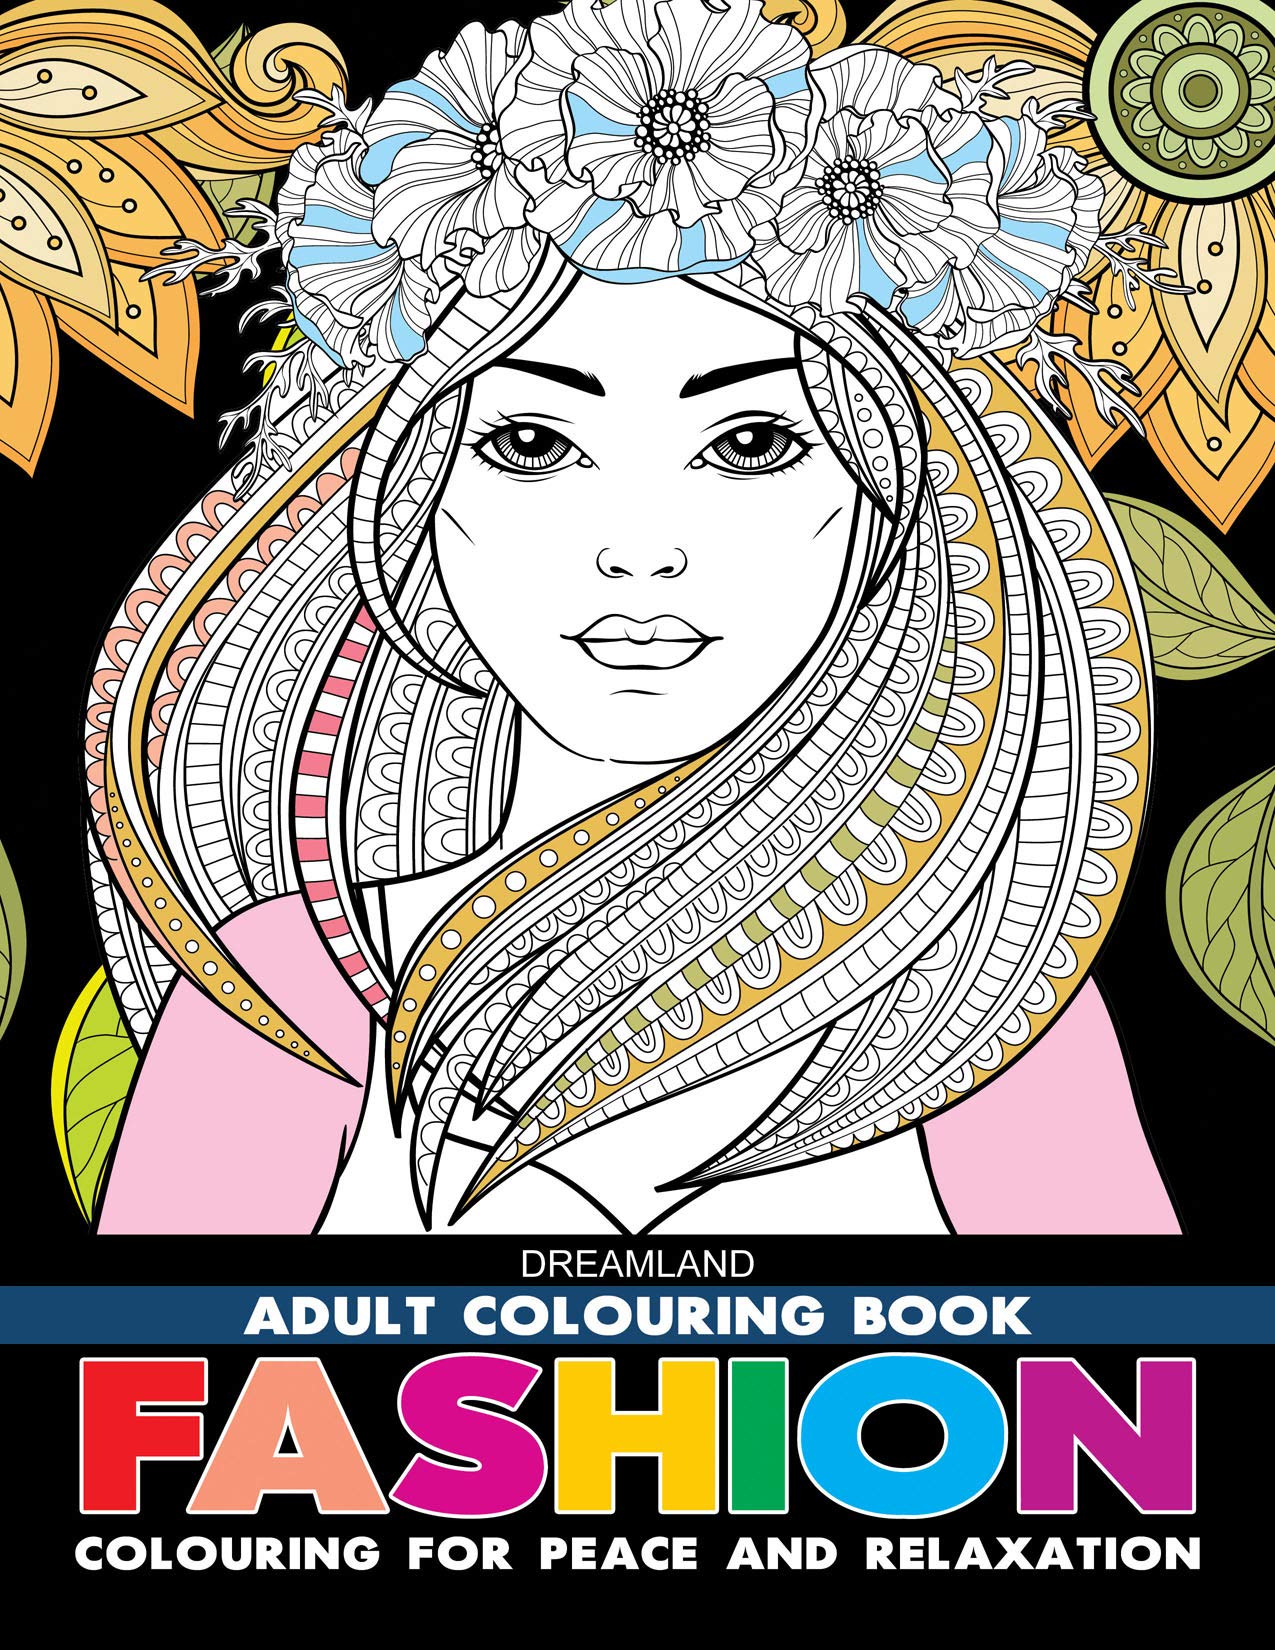 Fashion - Adult Colouring Book for Peace & Relaxation